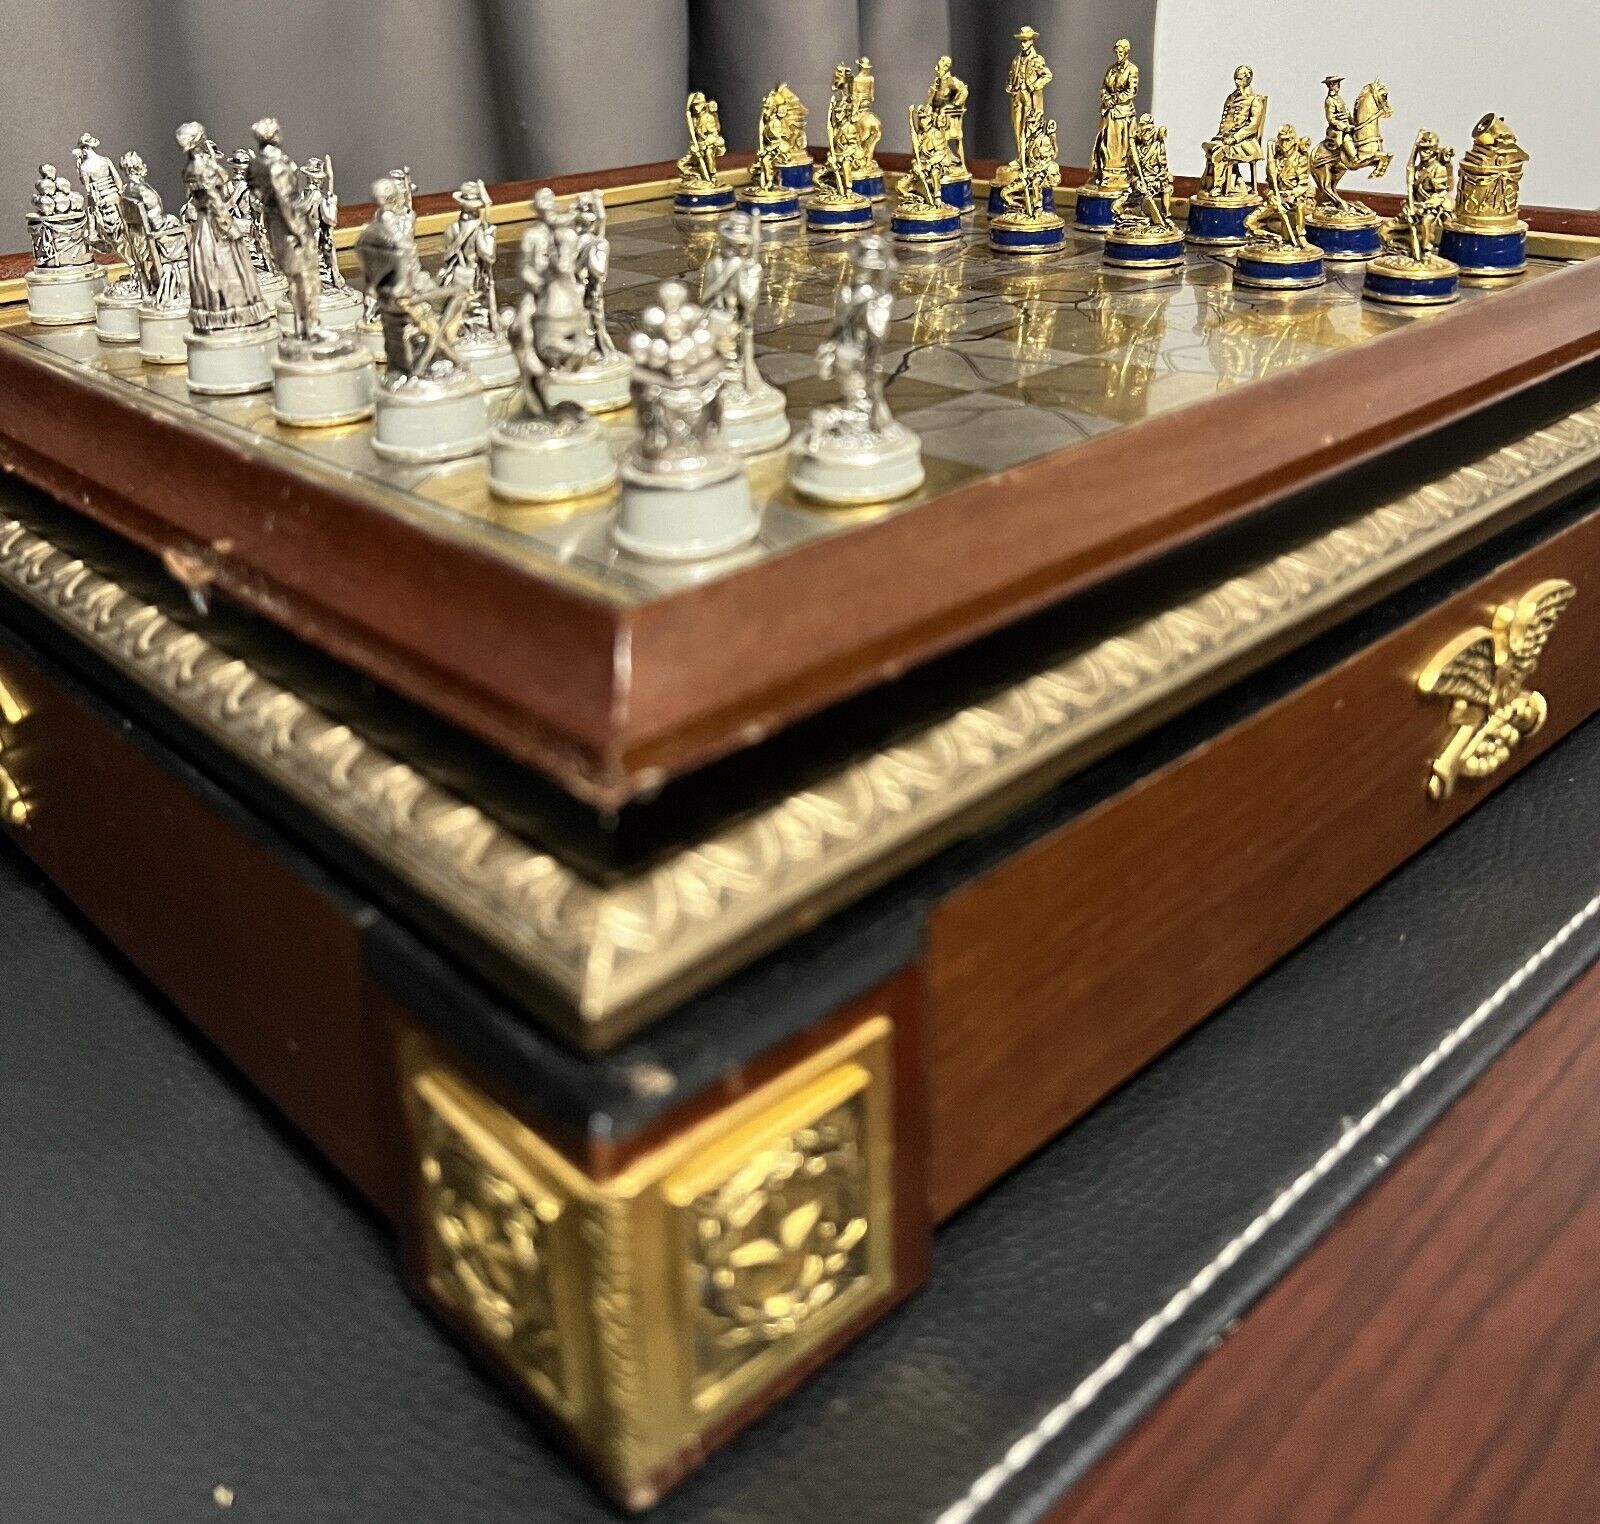 Franklin Mint Civil War Chess Set, Gold and Silver Edition 1988